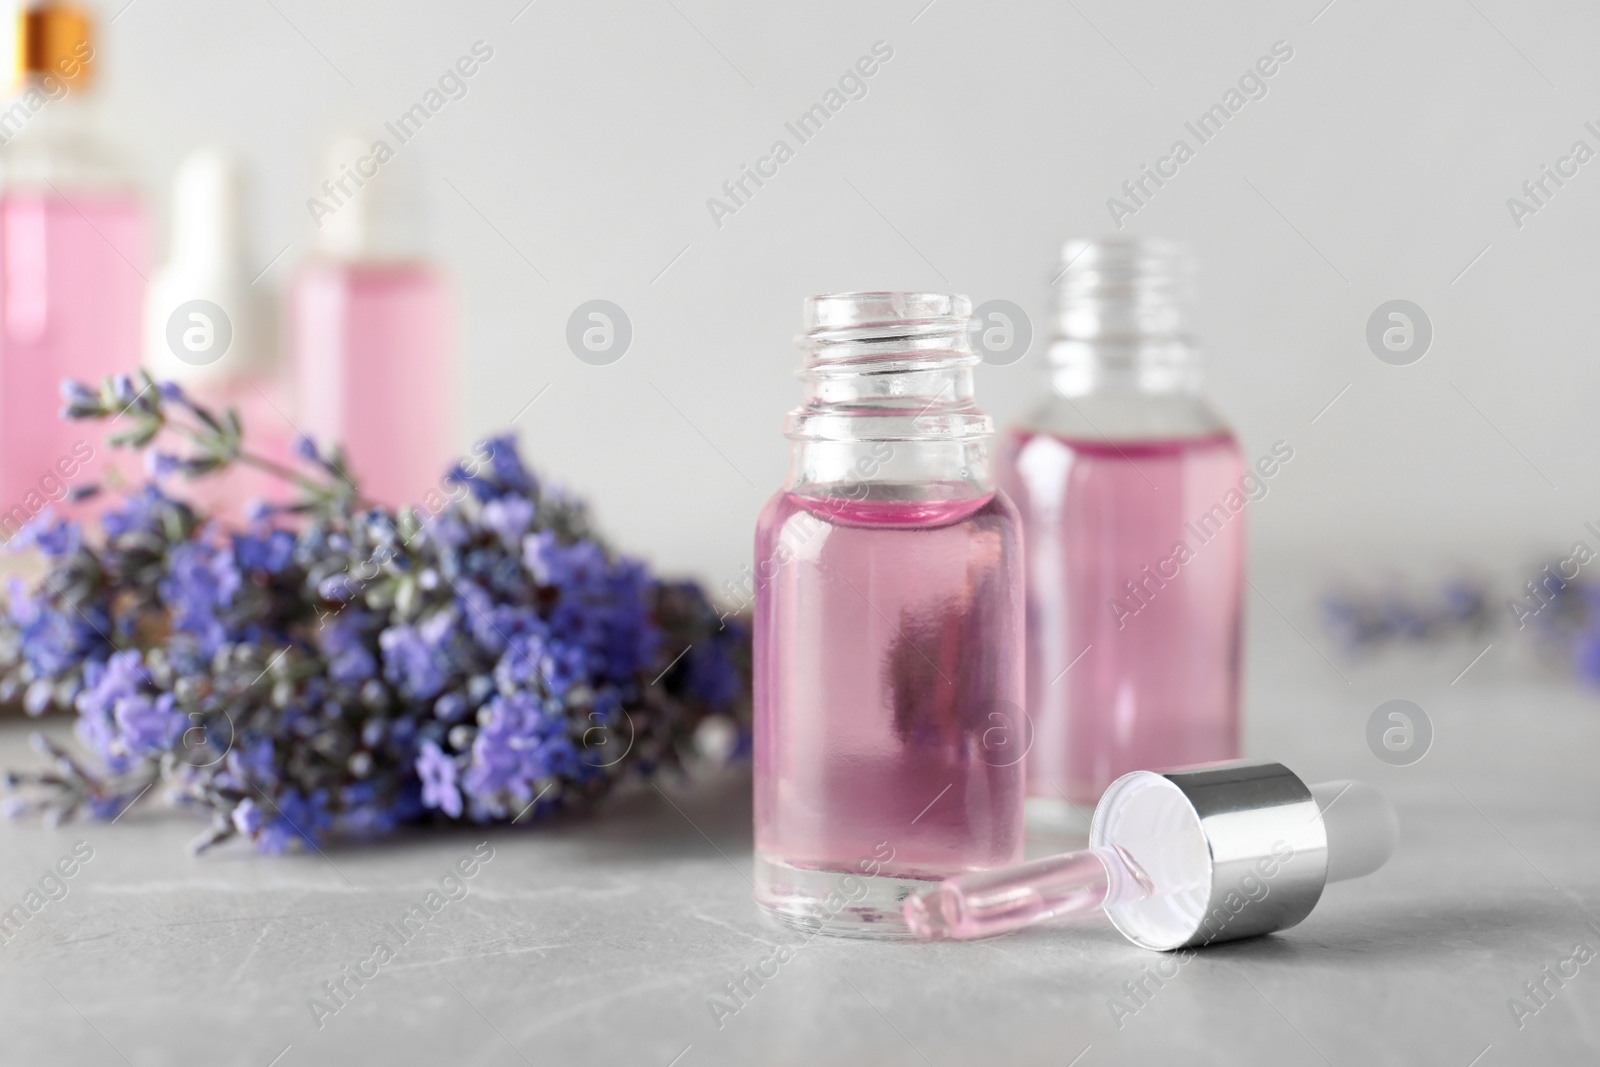 Photo of Bottles of essential oil and lavender flowers on stone table